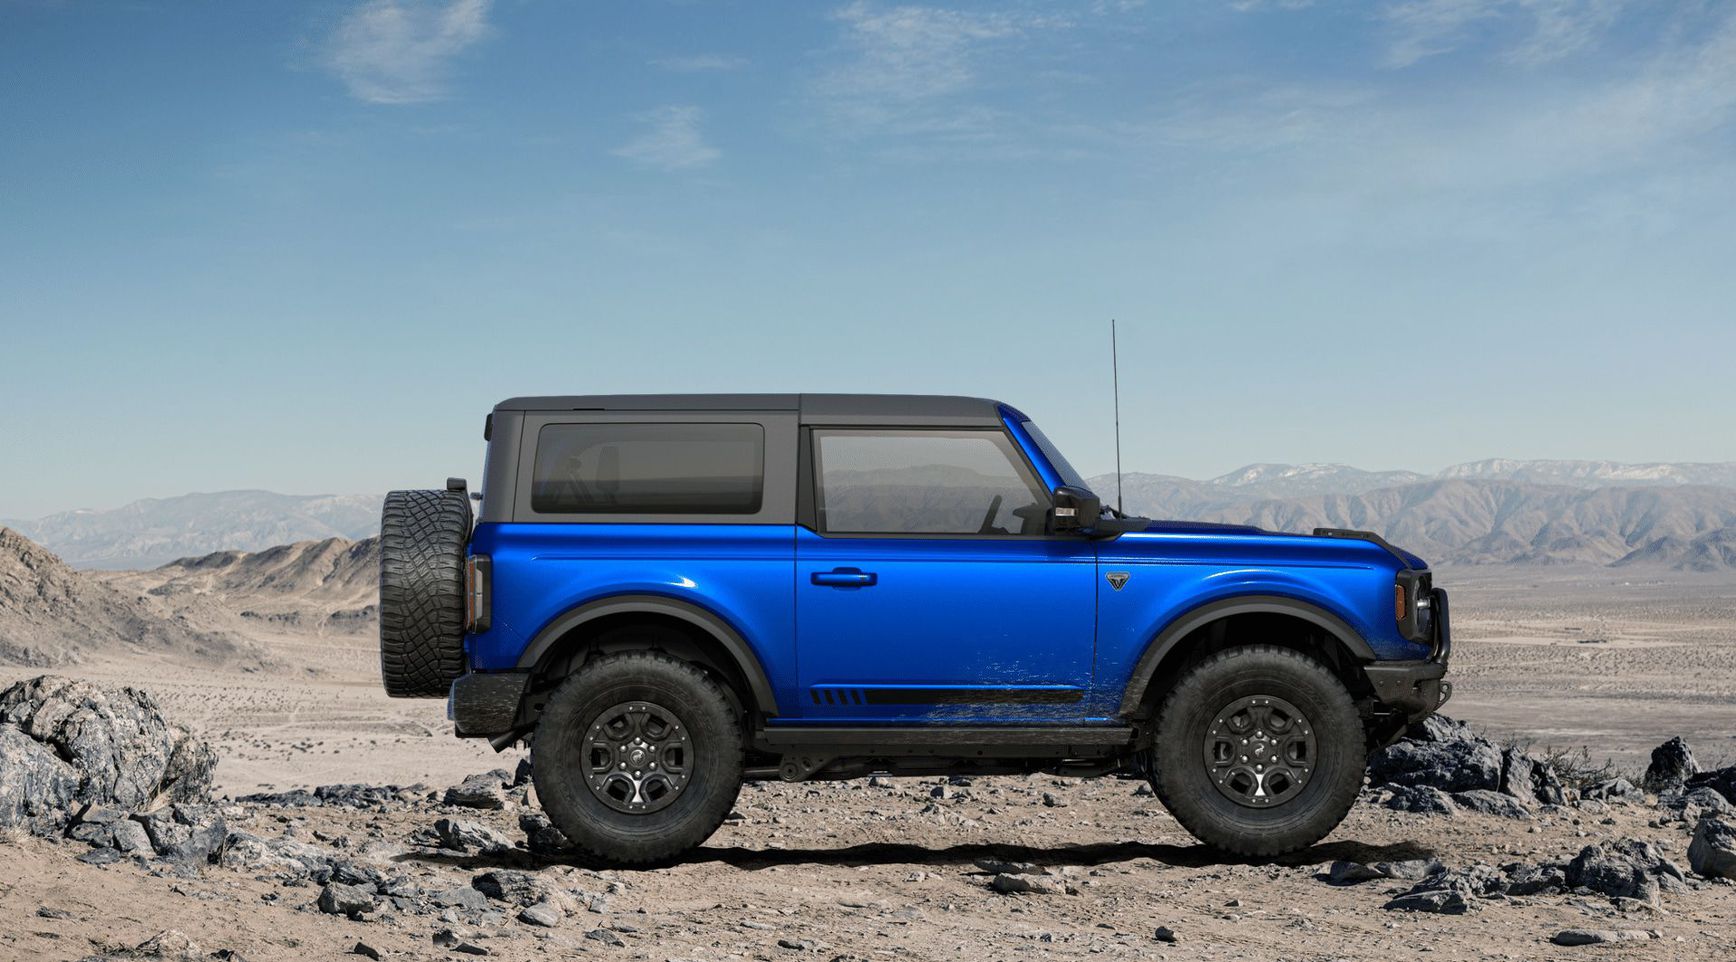 Ford Bronco First Edition (двухдверная кабина) 2021